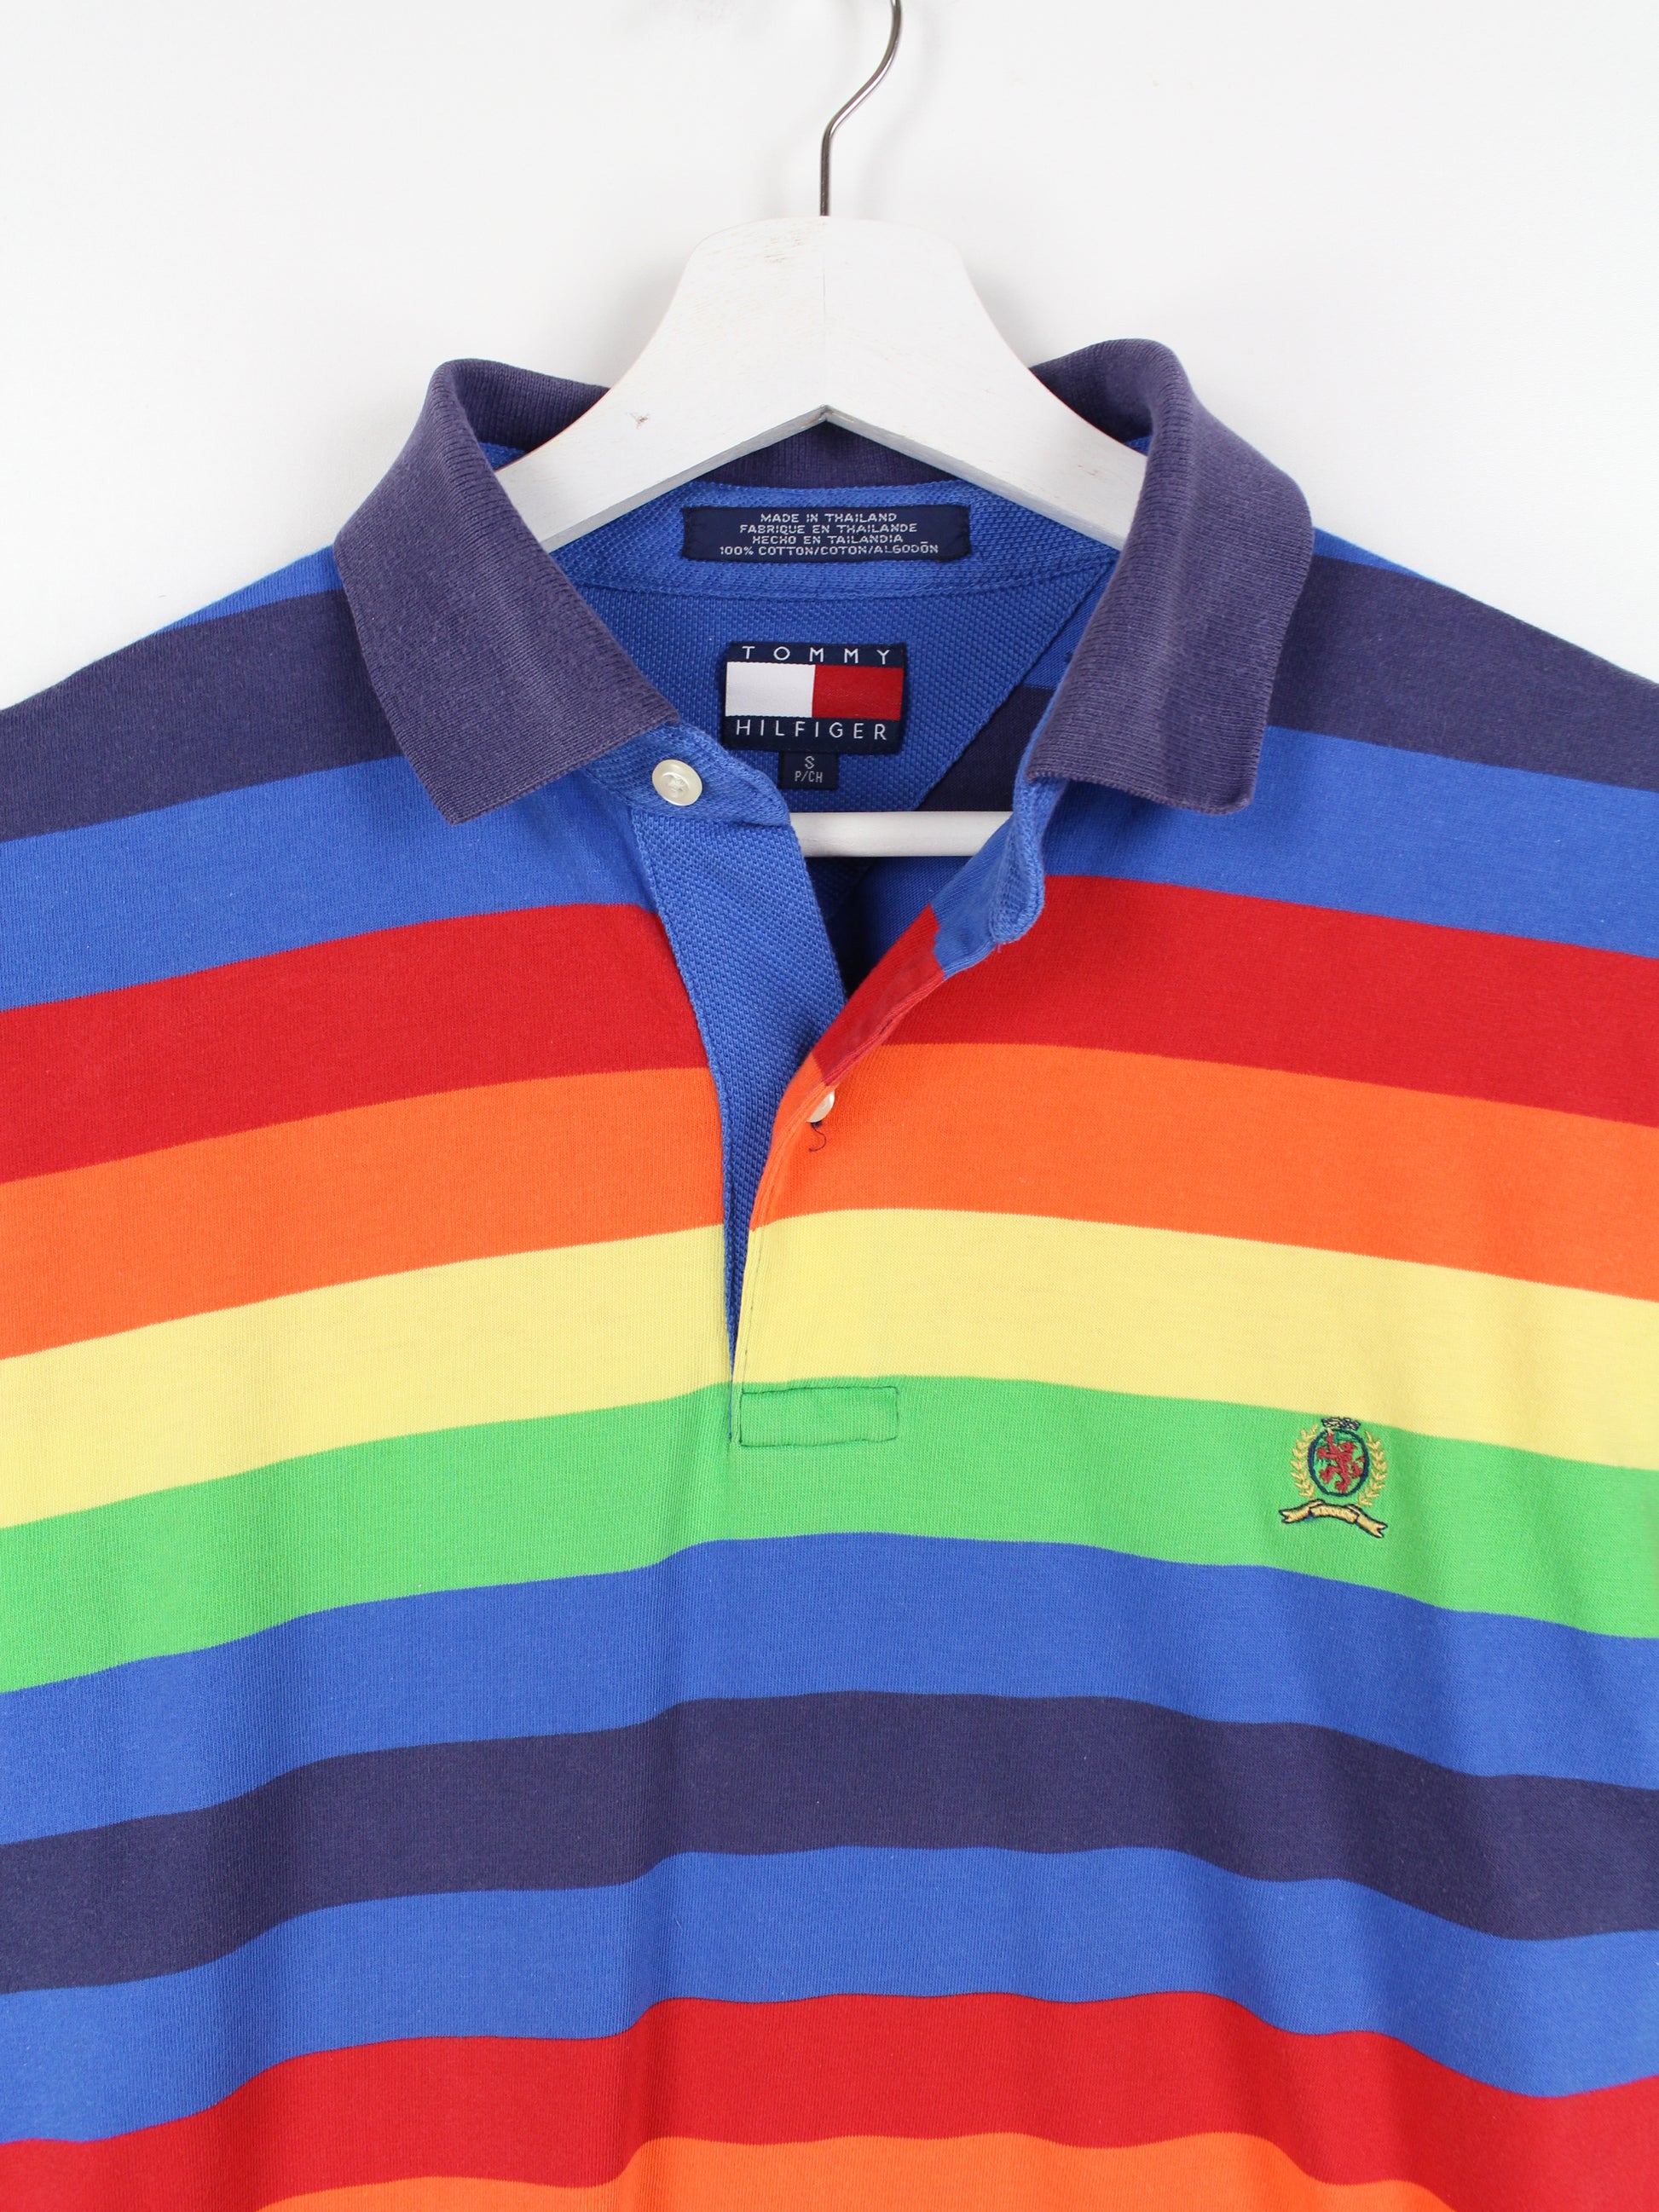 Tommy Striped – Multicolored Hilfiger Peeces Polo Shirt S